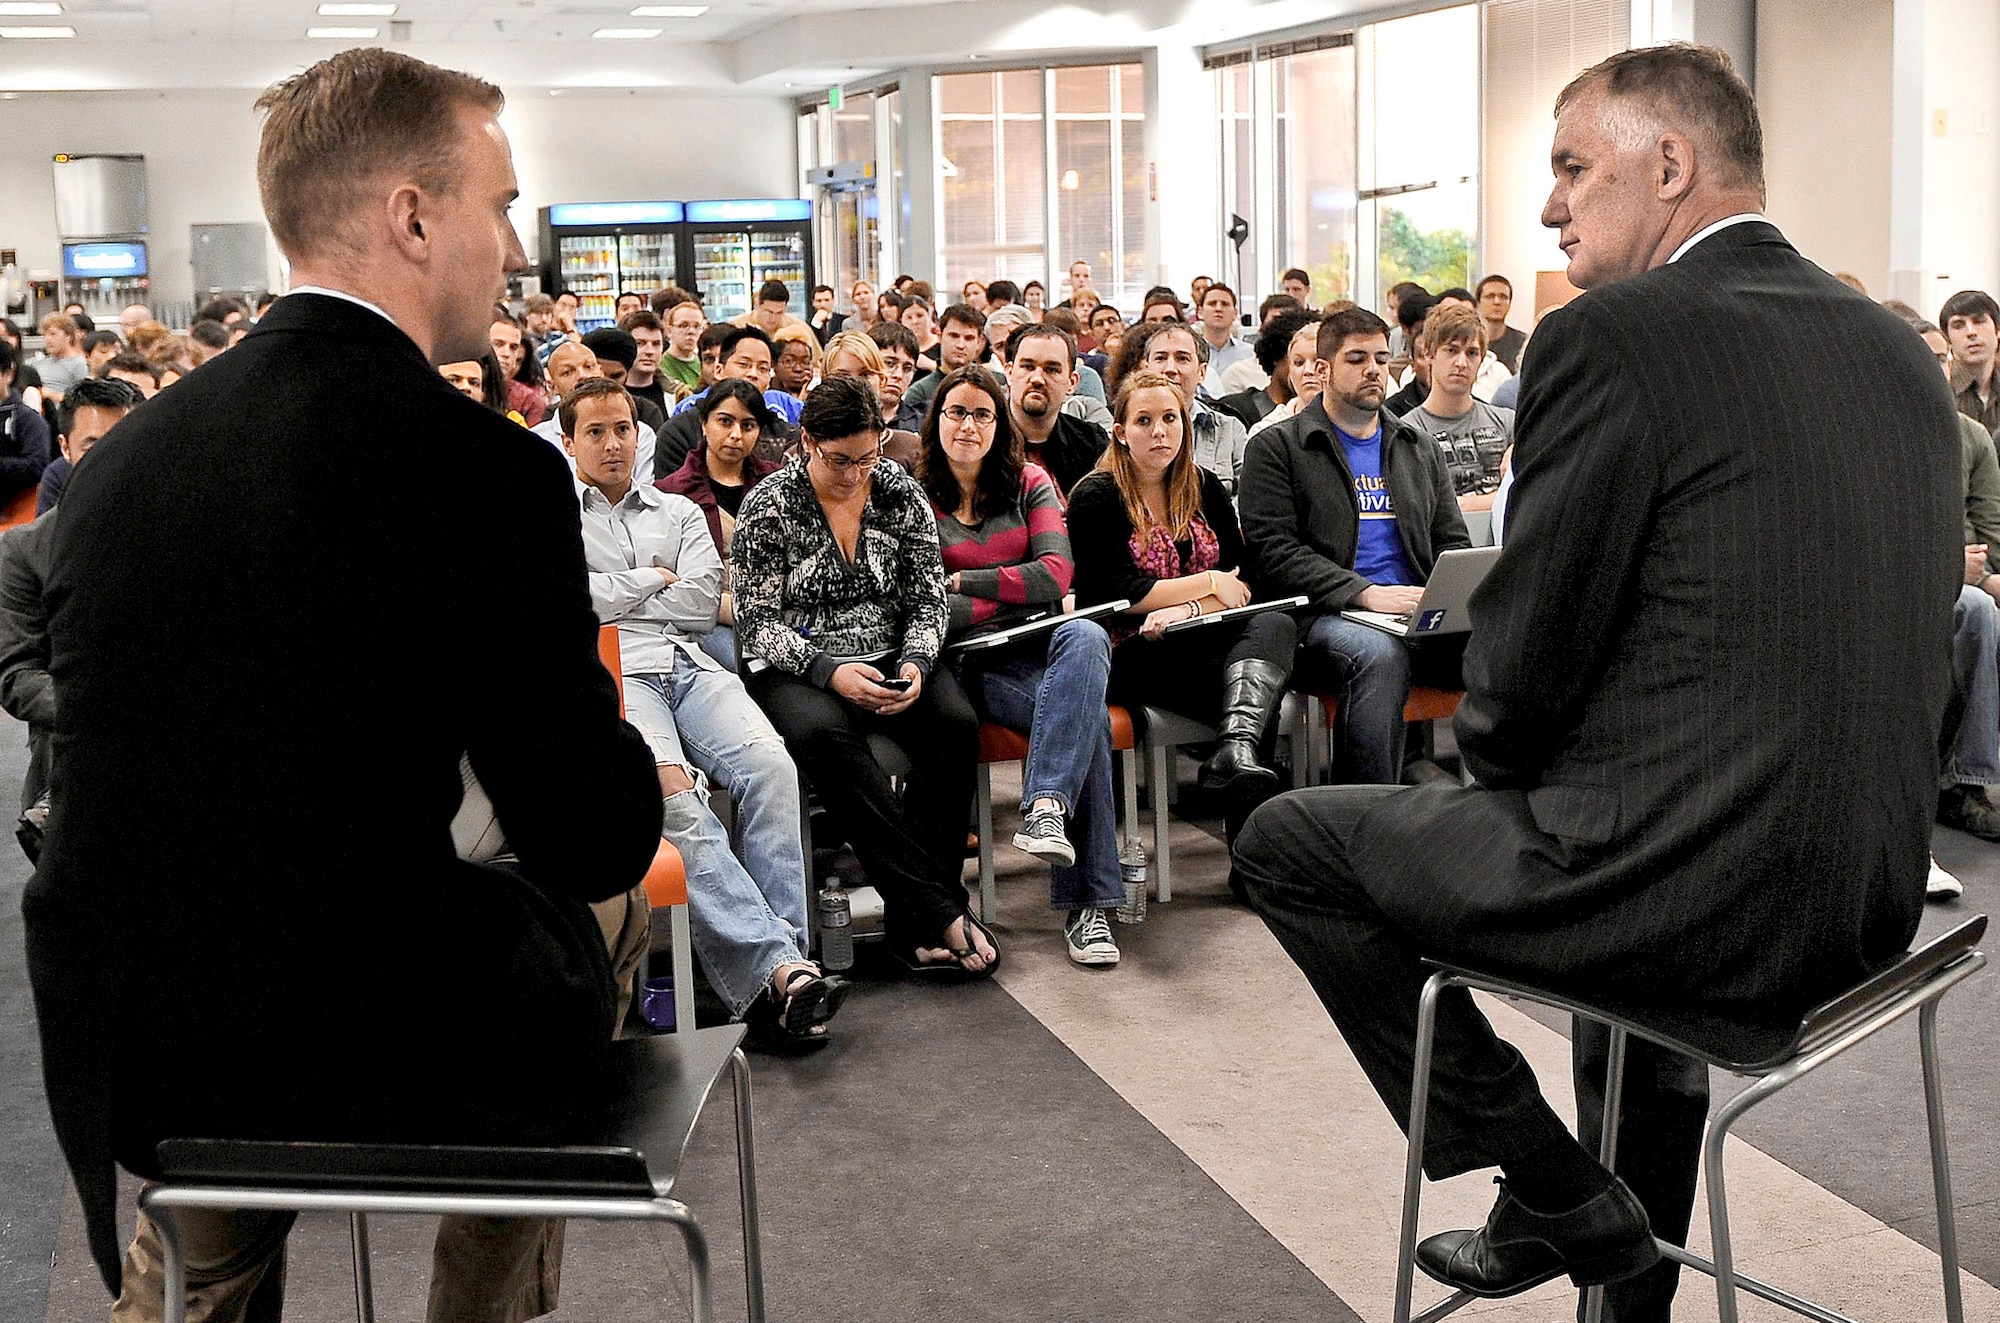 Deputy Defense Secretary William J. Lynn III (right) and former Marine Don Faul, director of online operations for the Facebook social media website, talk to Facebook employees in Silicon Valley, Calif., April 28, 2010.  (Defense Department photo/ Master Sgt. Jerry Morrison) 